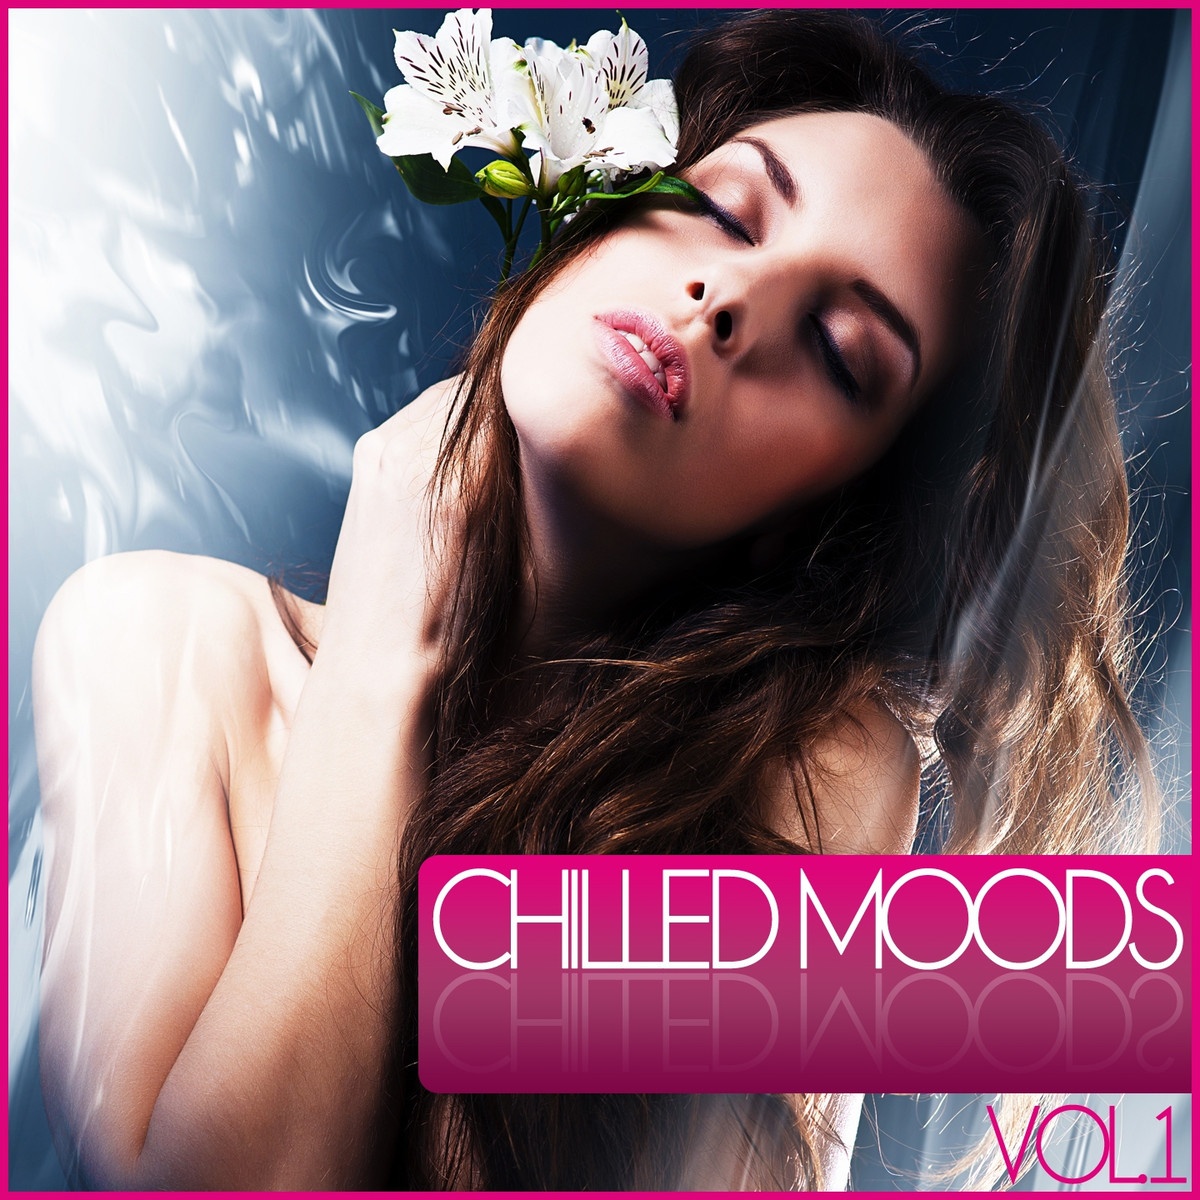 Chilled Moods, Vol. 1